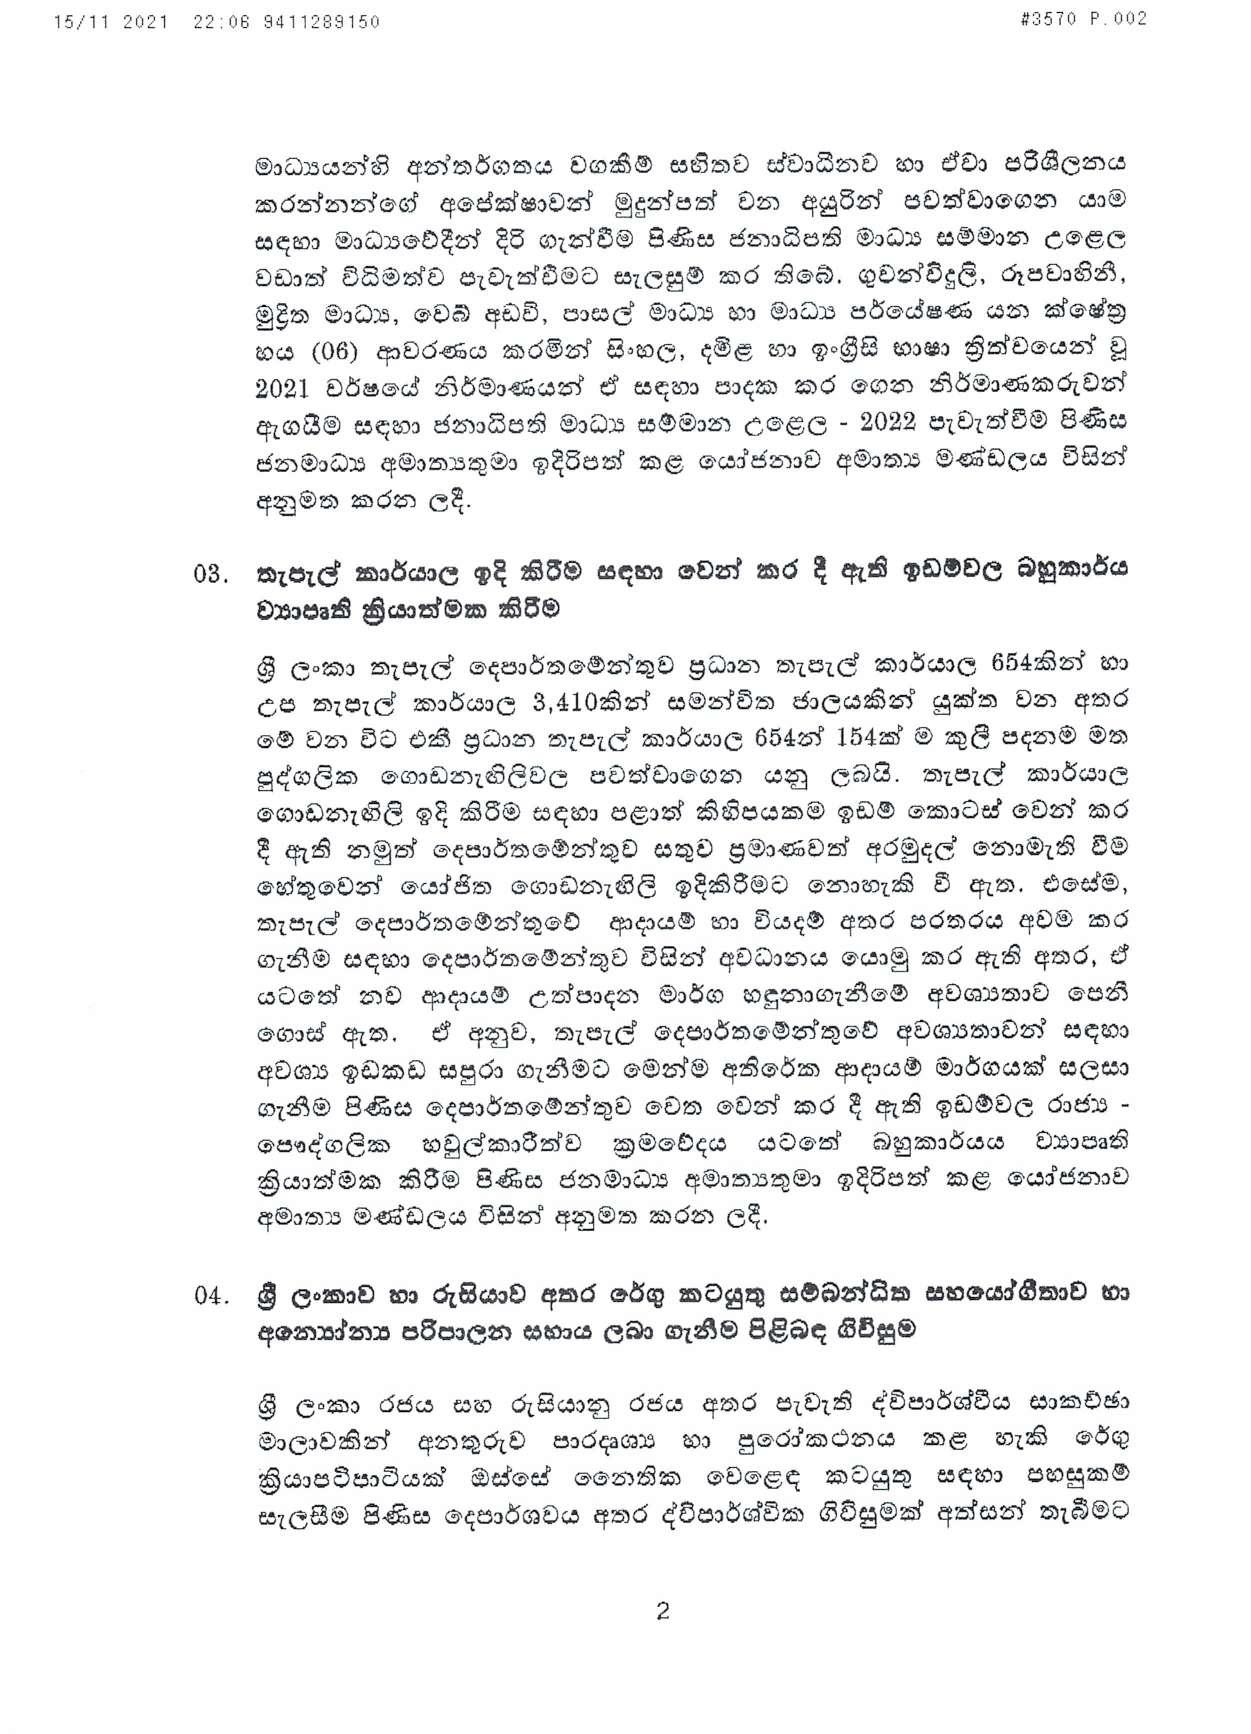 Cabinet Decision on 15.11.2021 compressed page 002